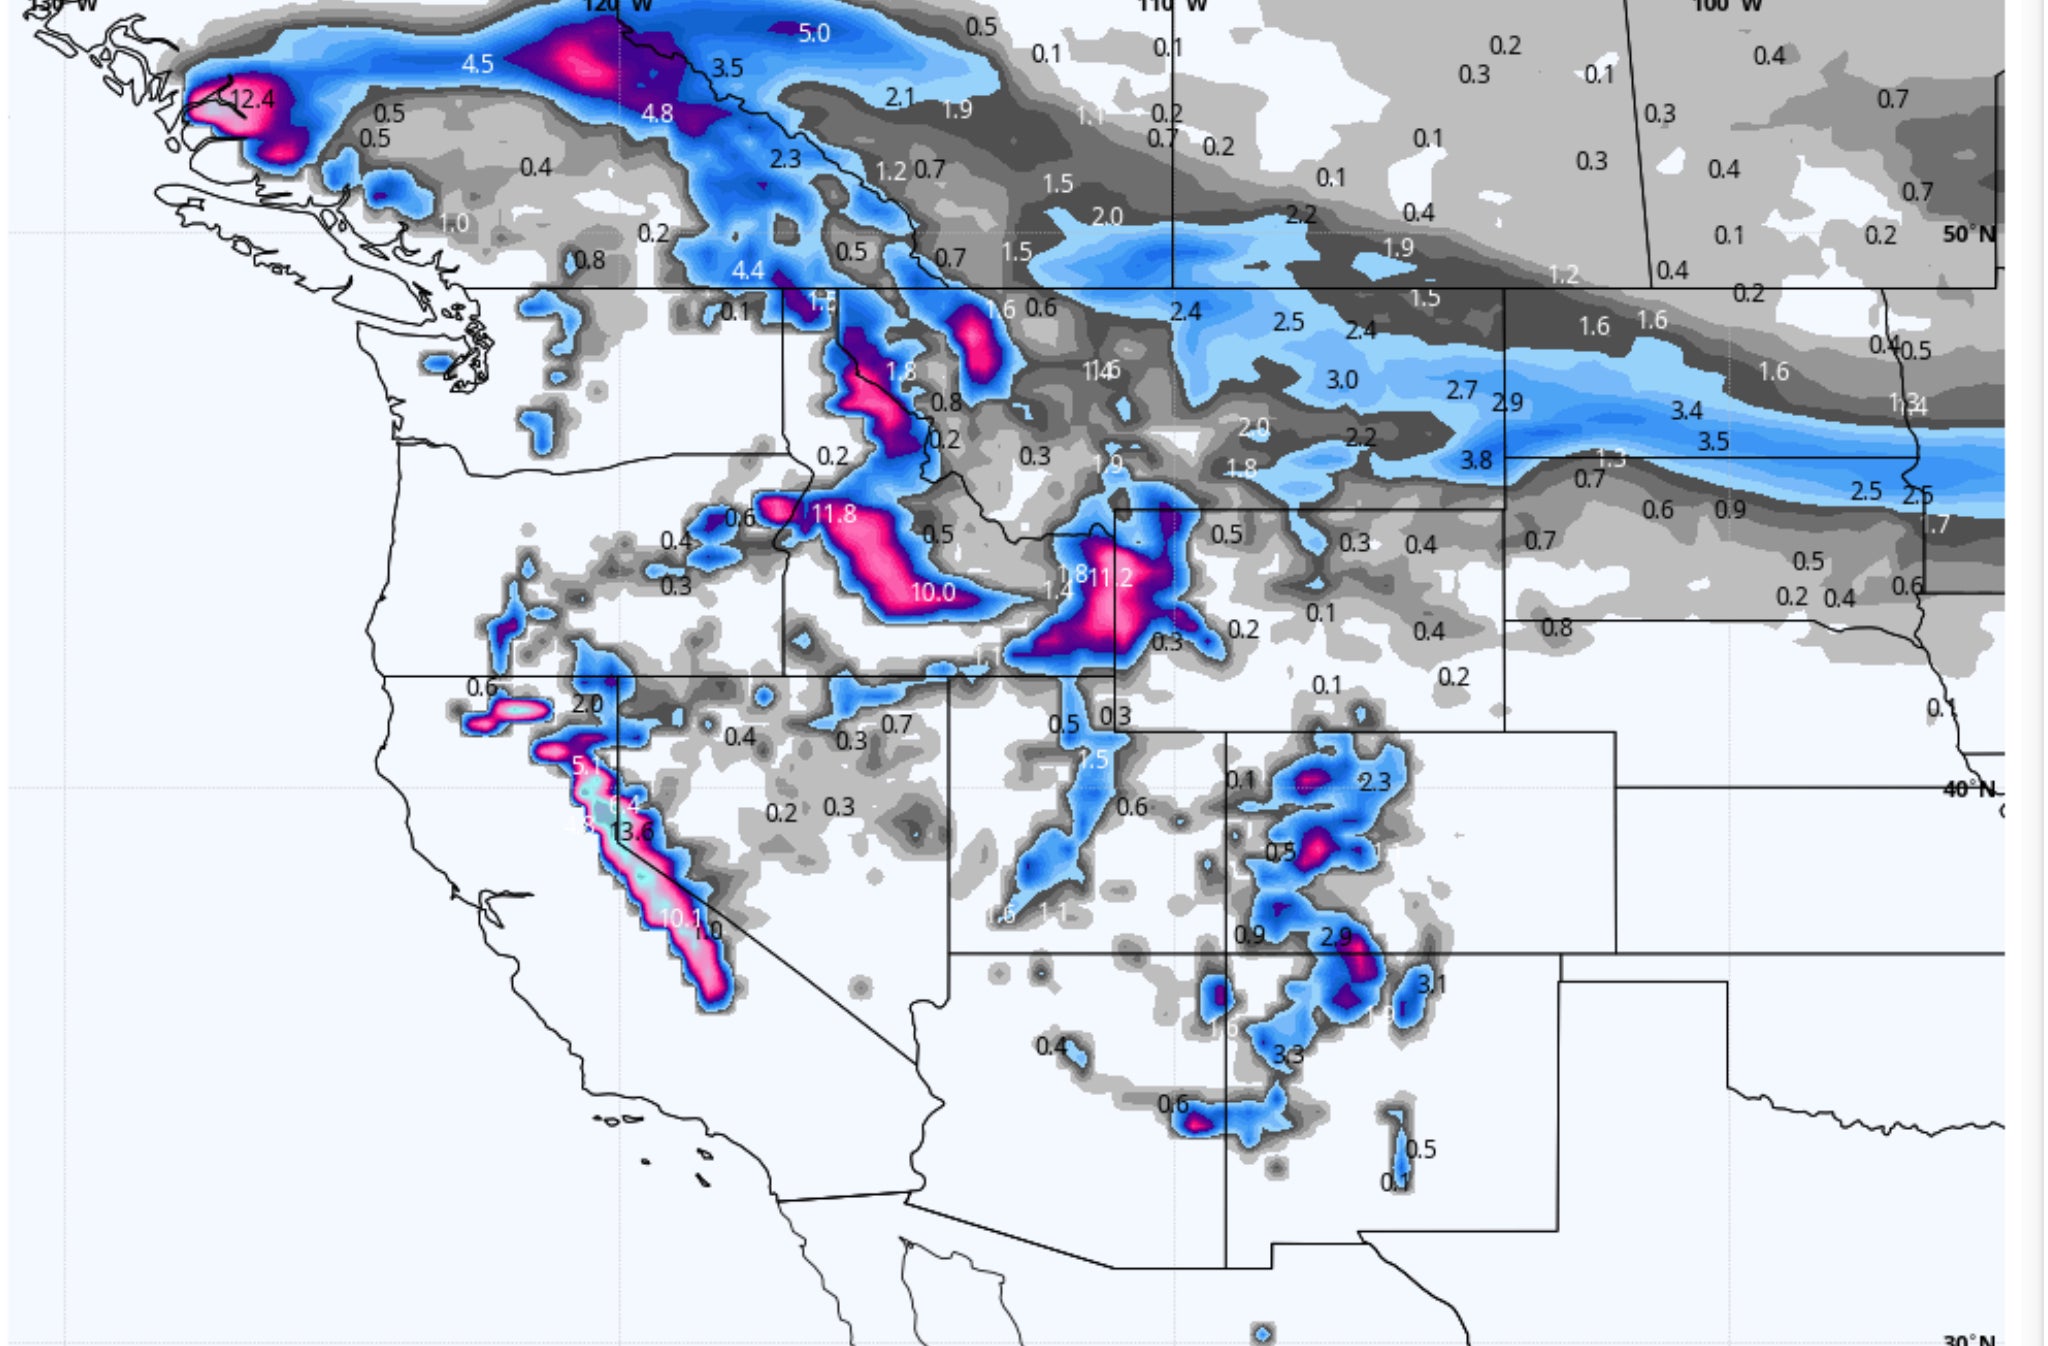 UPDATED WEEKEND POWDER FORECAST FOR THE WEST. THE EXTENDED LOOKS PROMISING FOR THE PACIFIC NORTHWEST!